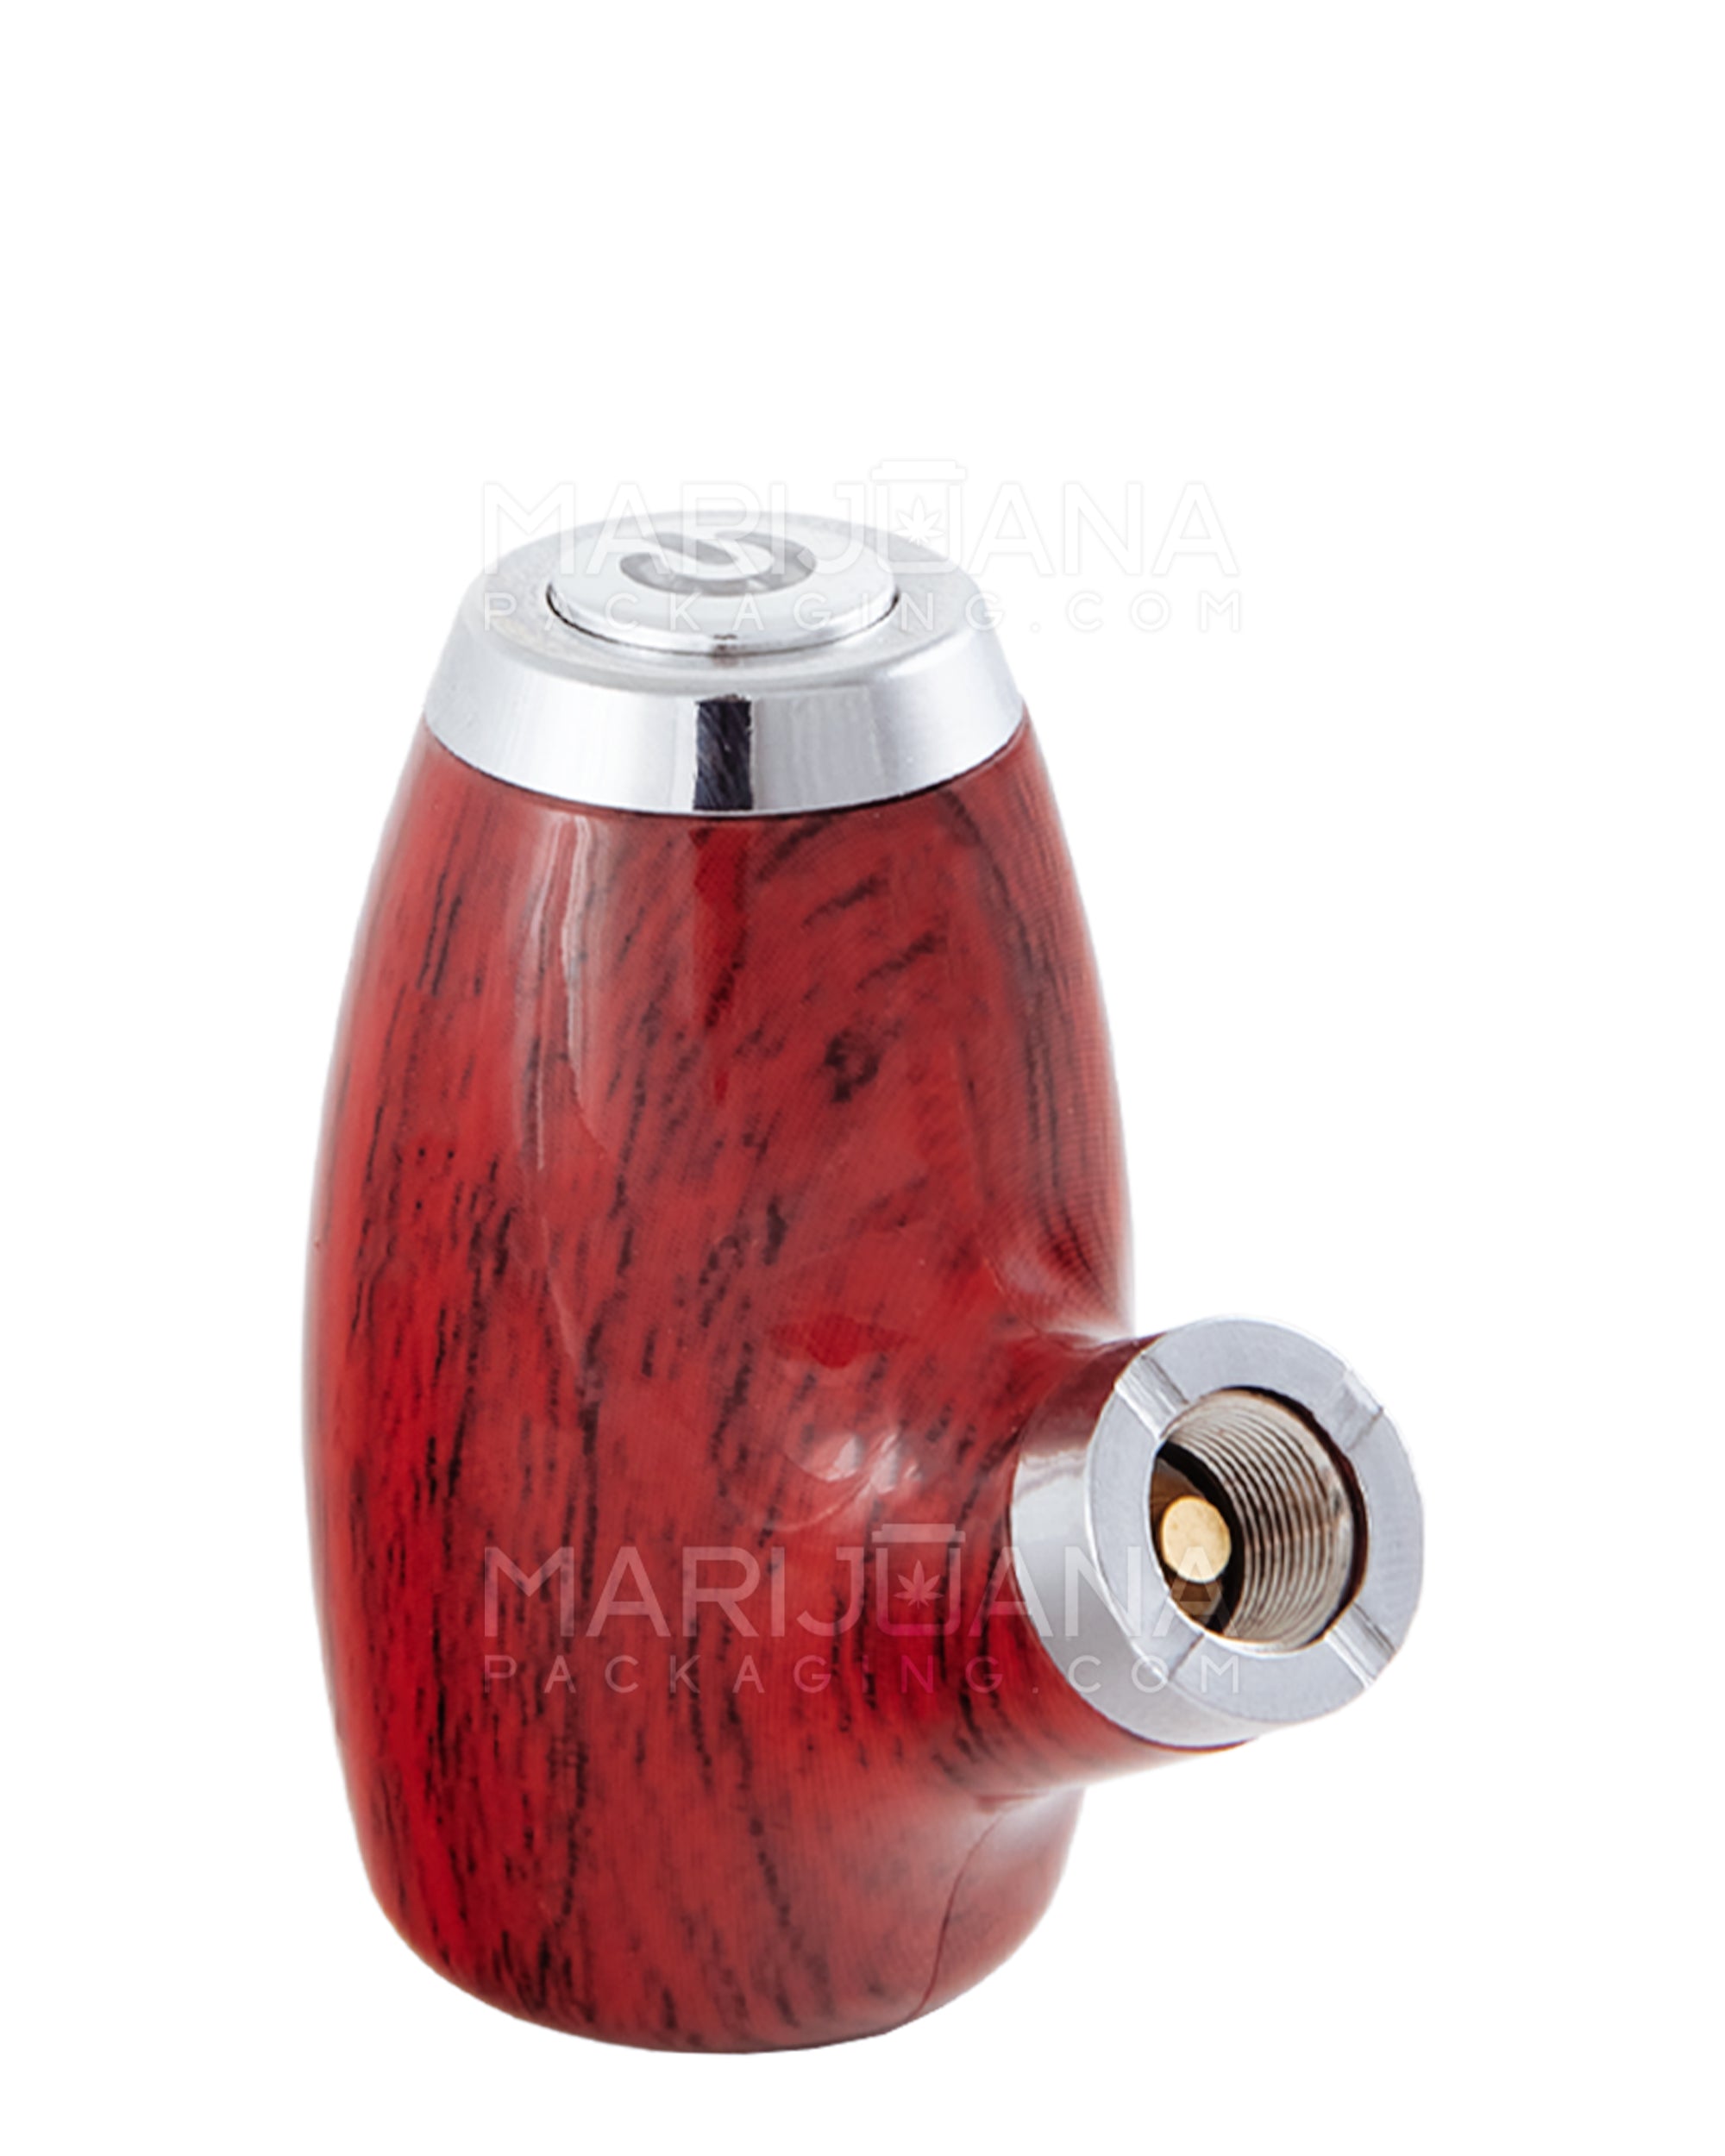 Variable Voltage "Old Man's Pipe" Shaped Vape Cartridge Battery | 900mah - Redwood Wood - 510 Thread - 9